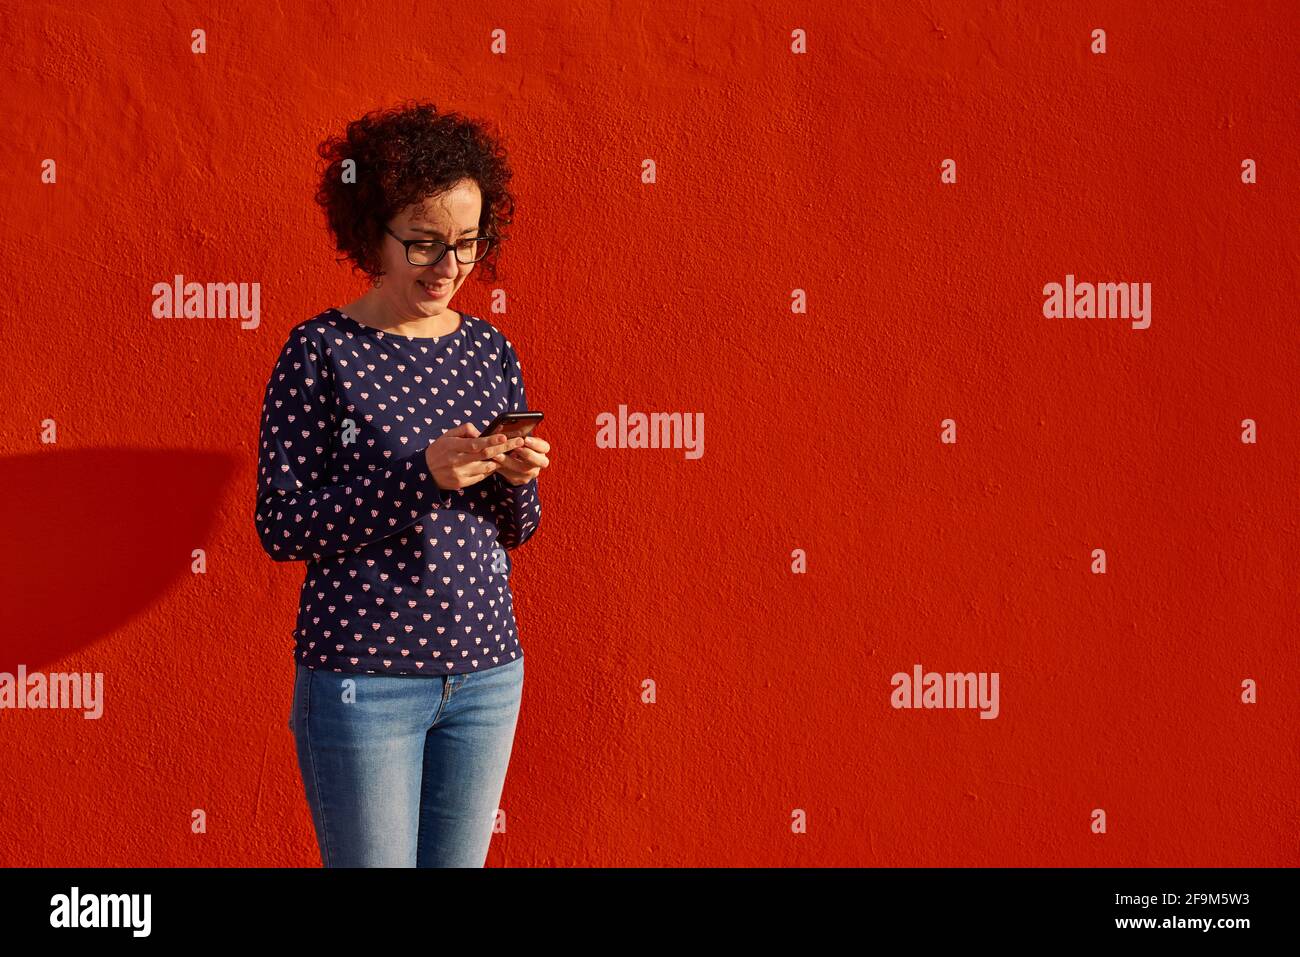 Front view of a happy woman standing against a bright red wall using her smartphone. High quality photo. Stock Photo